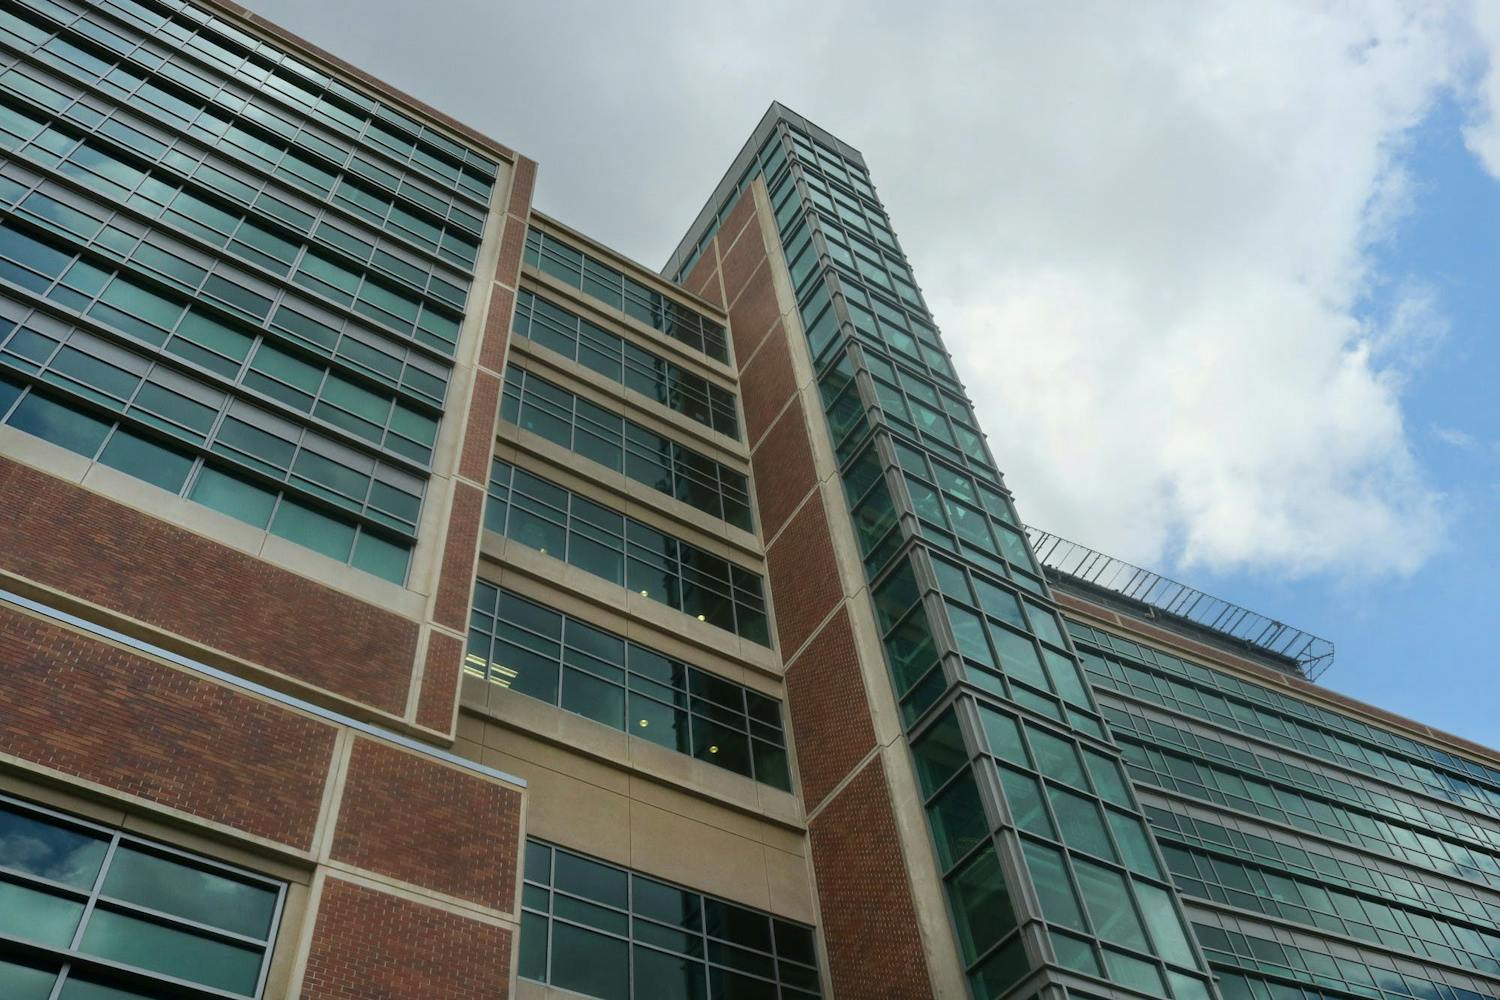 The UF Health Shands Hospital building in Gainesville, as seen on June 29, 2021, hosts over 1,100 licensed beds and services over 120,000 emergency room visits annually, according to UF Health.